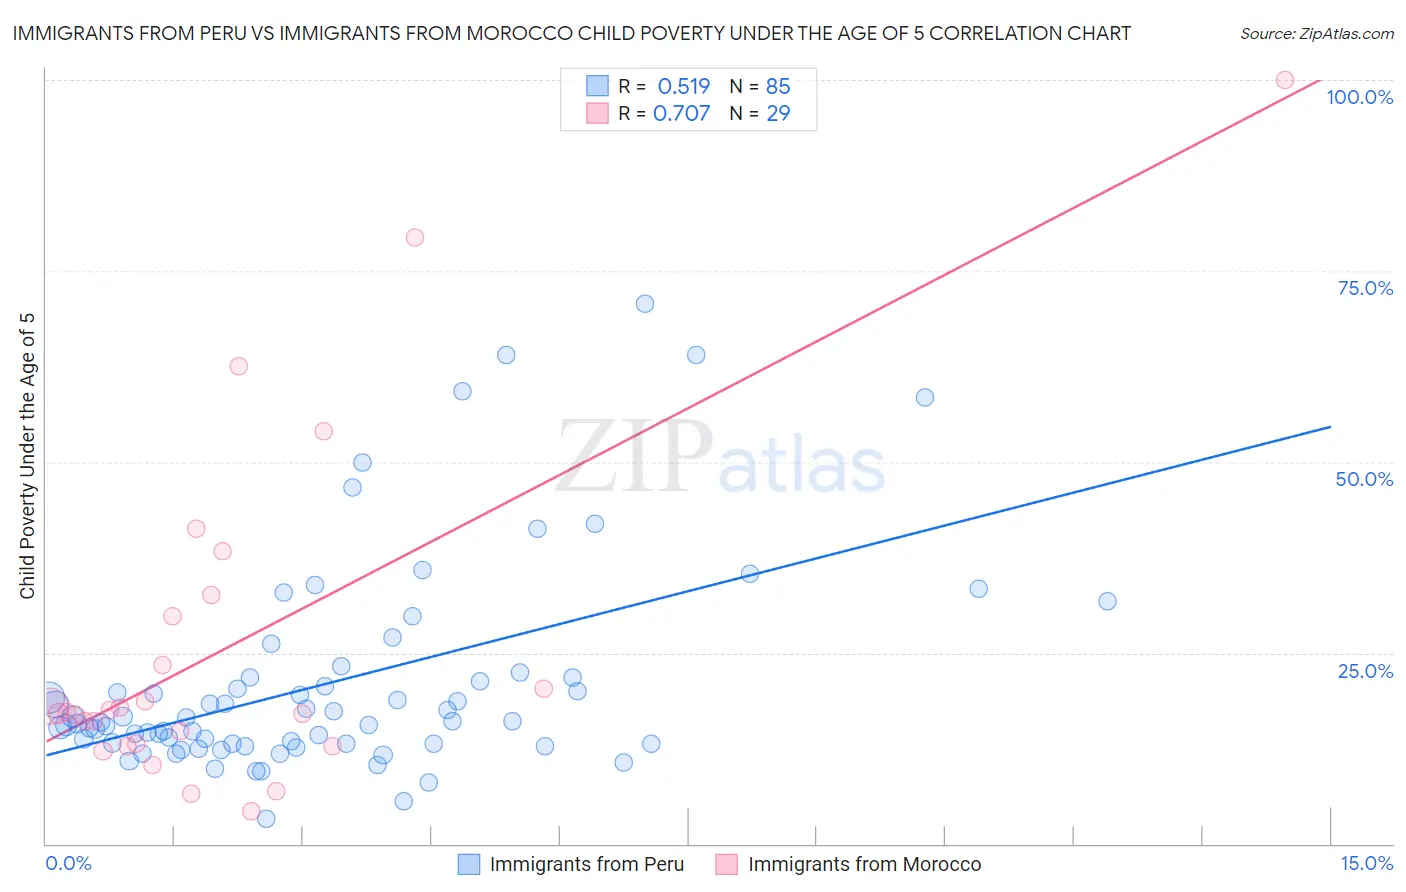 Immigrants from Peru vs Immigrants from Morocco Child Poverty Under the Age of 5